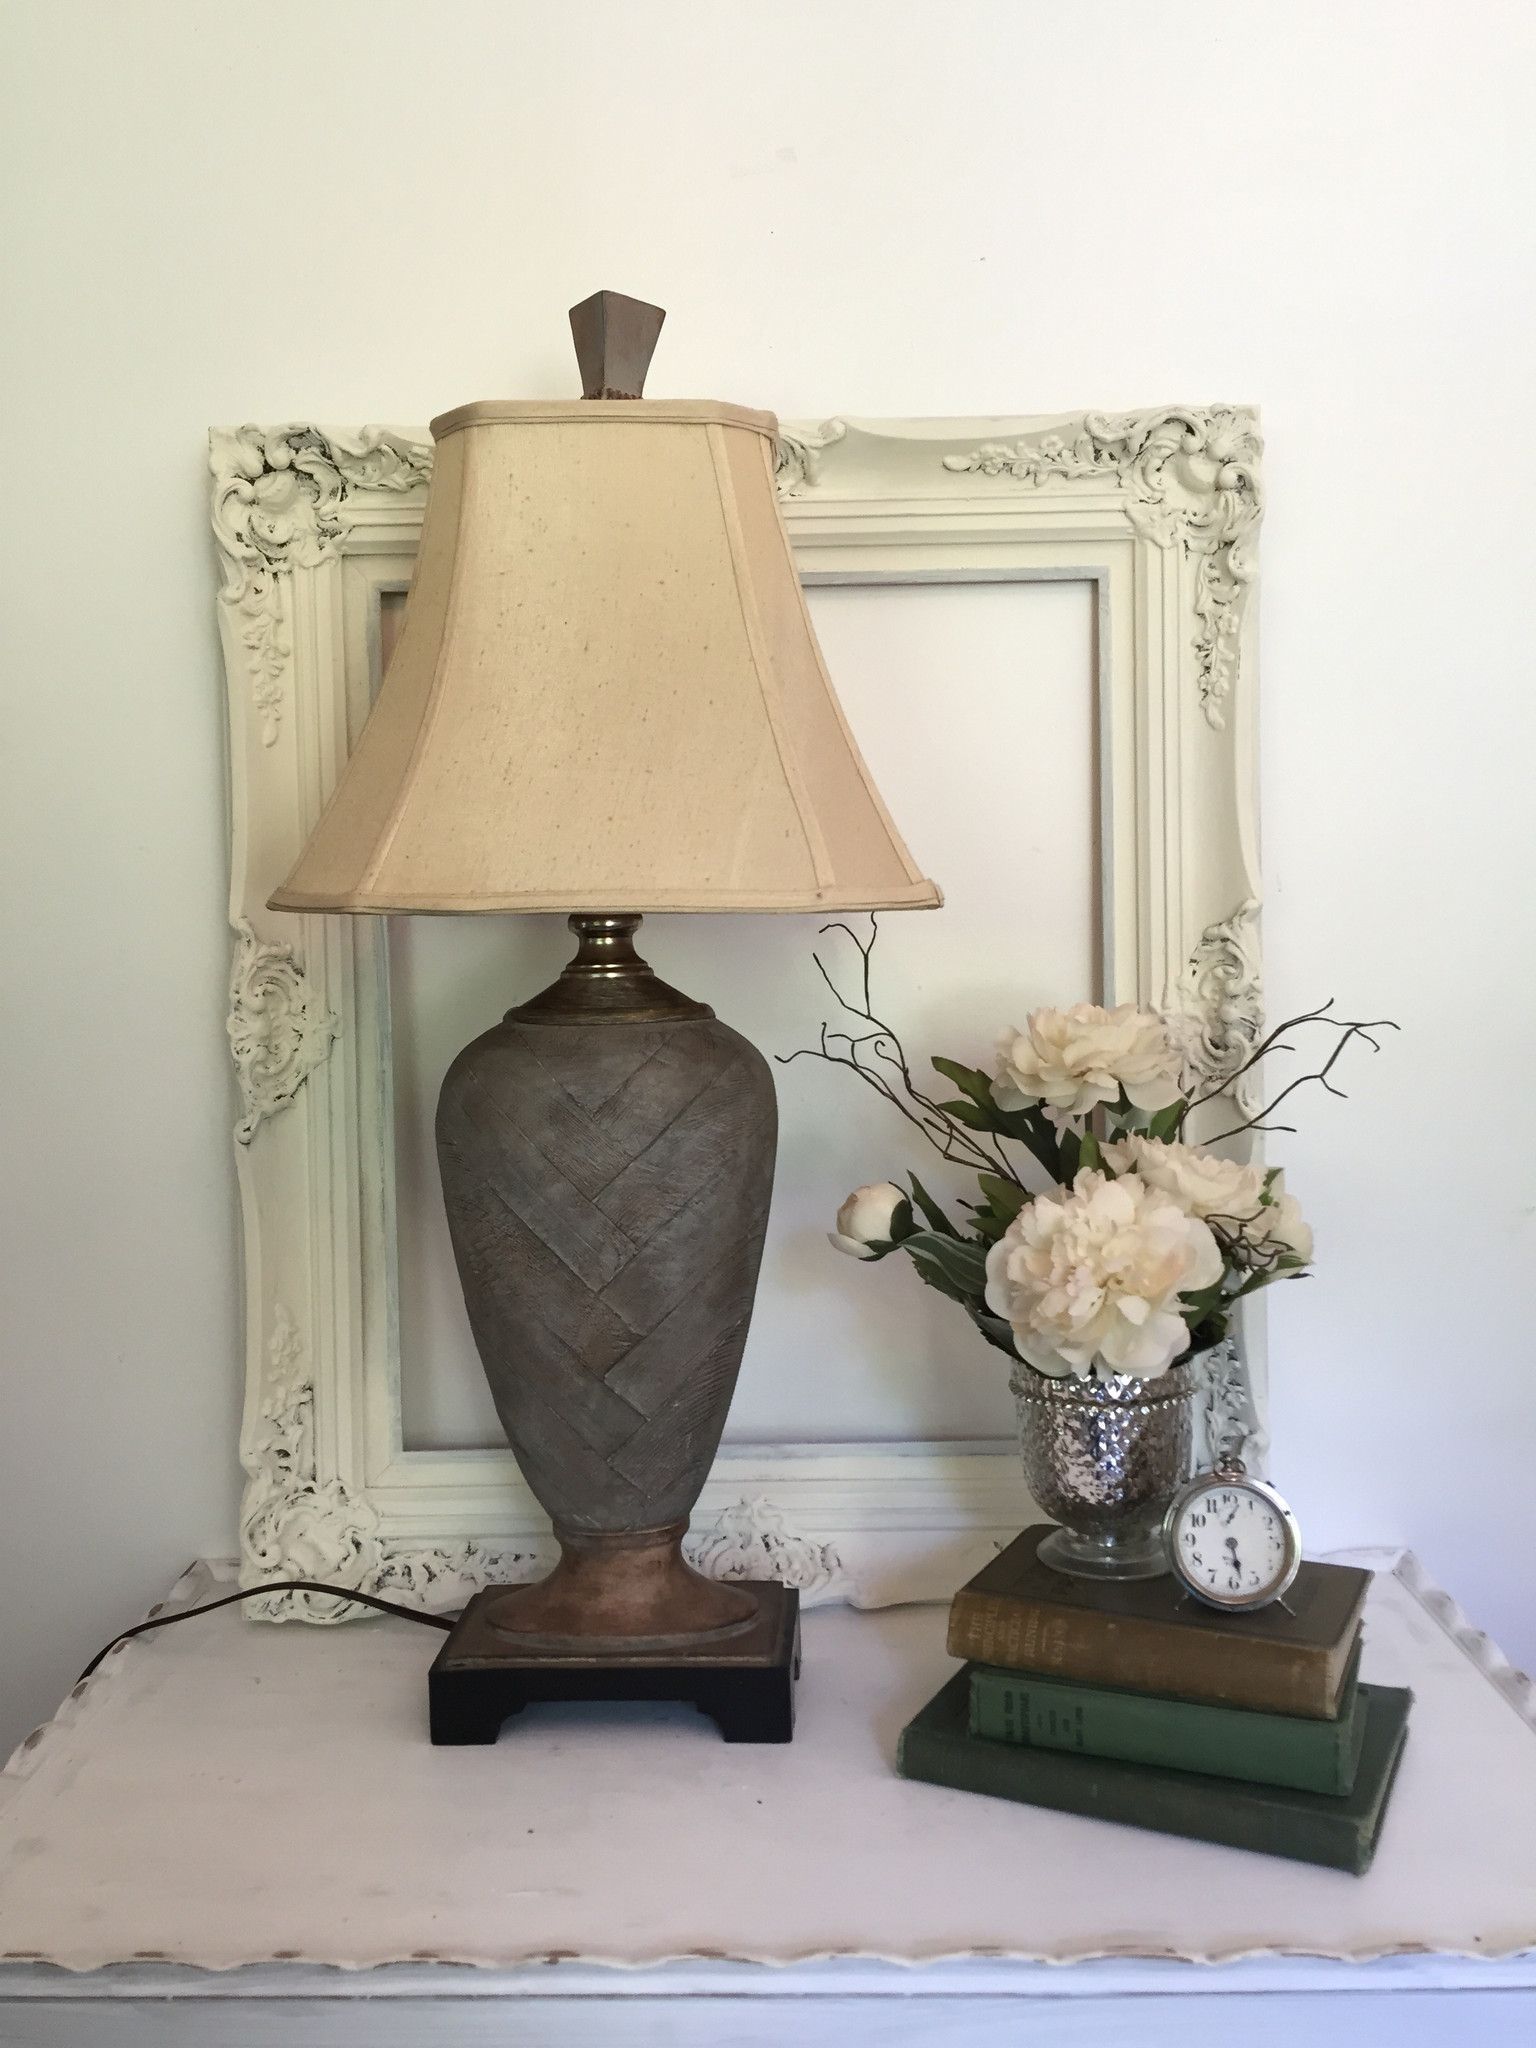 Tall Elegant Rustic Table Lamp | Gina Home | Pinterest | Rustic In Elegant Living Room Table Lamps (View 15 of 15)